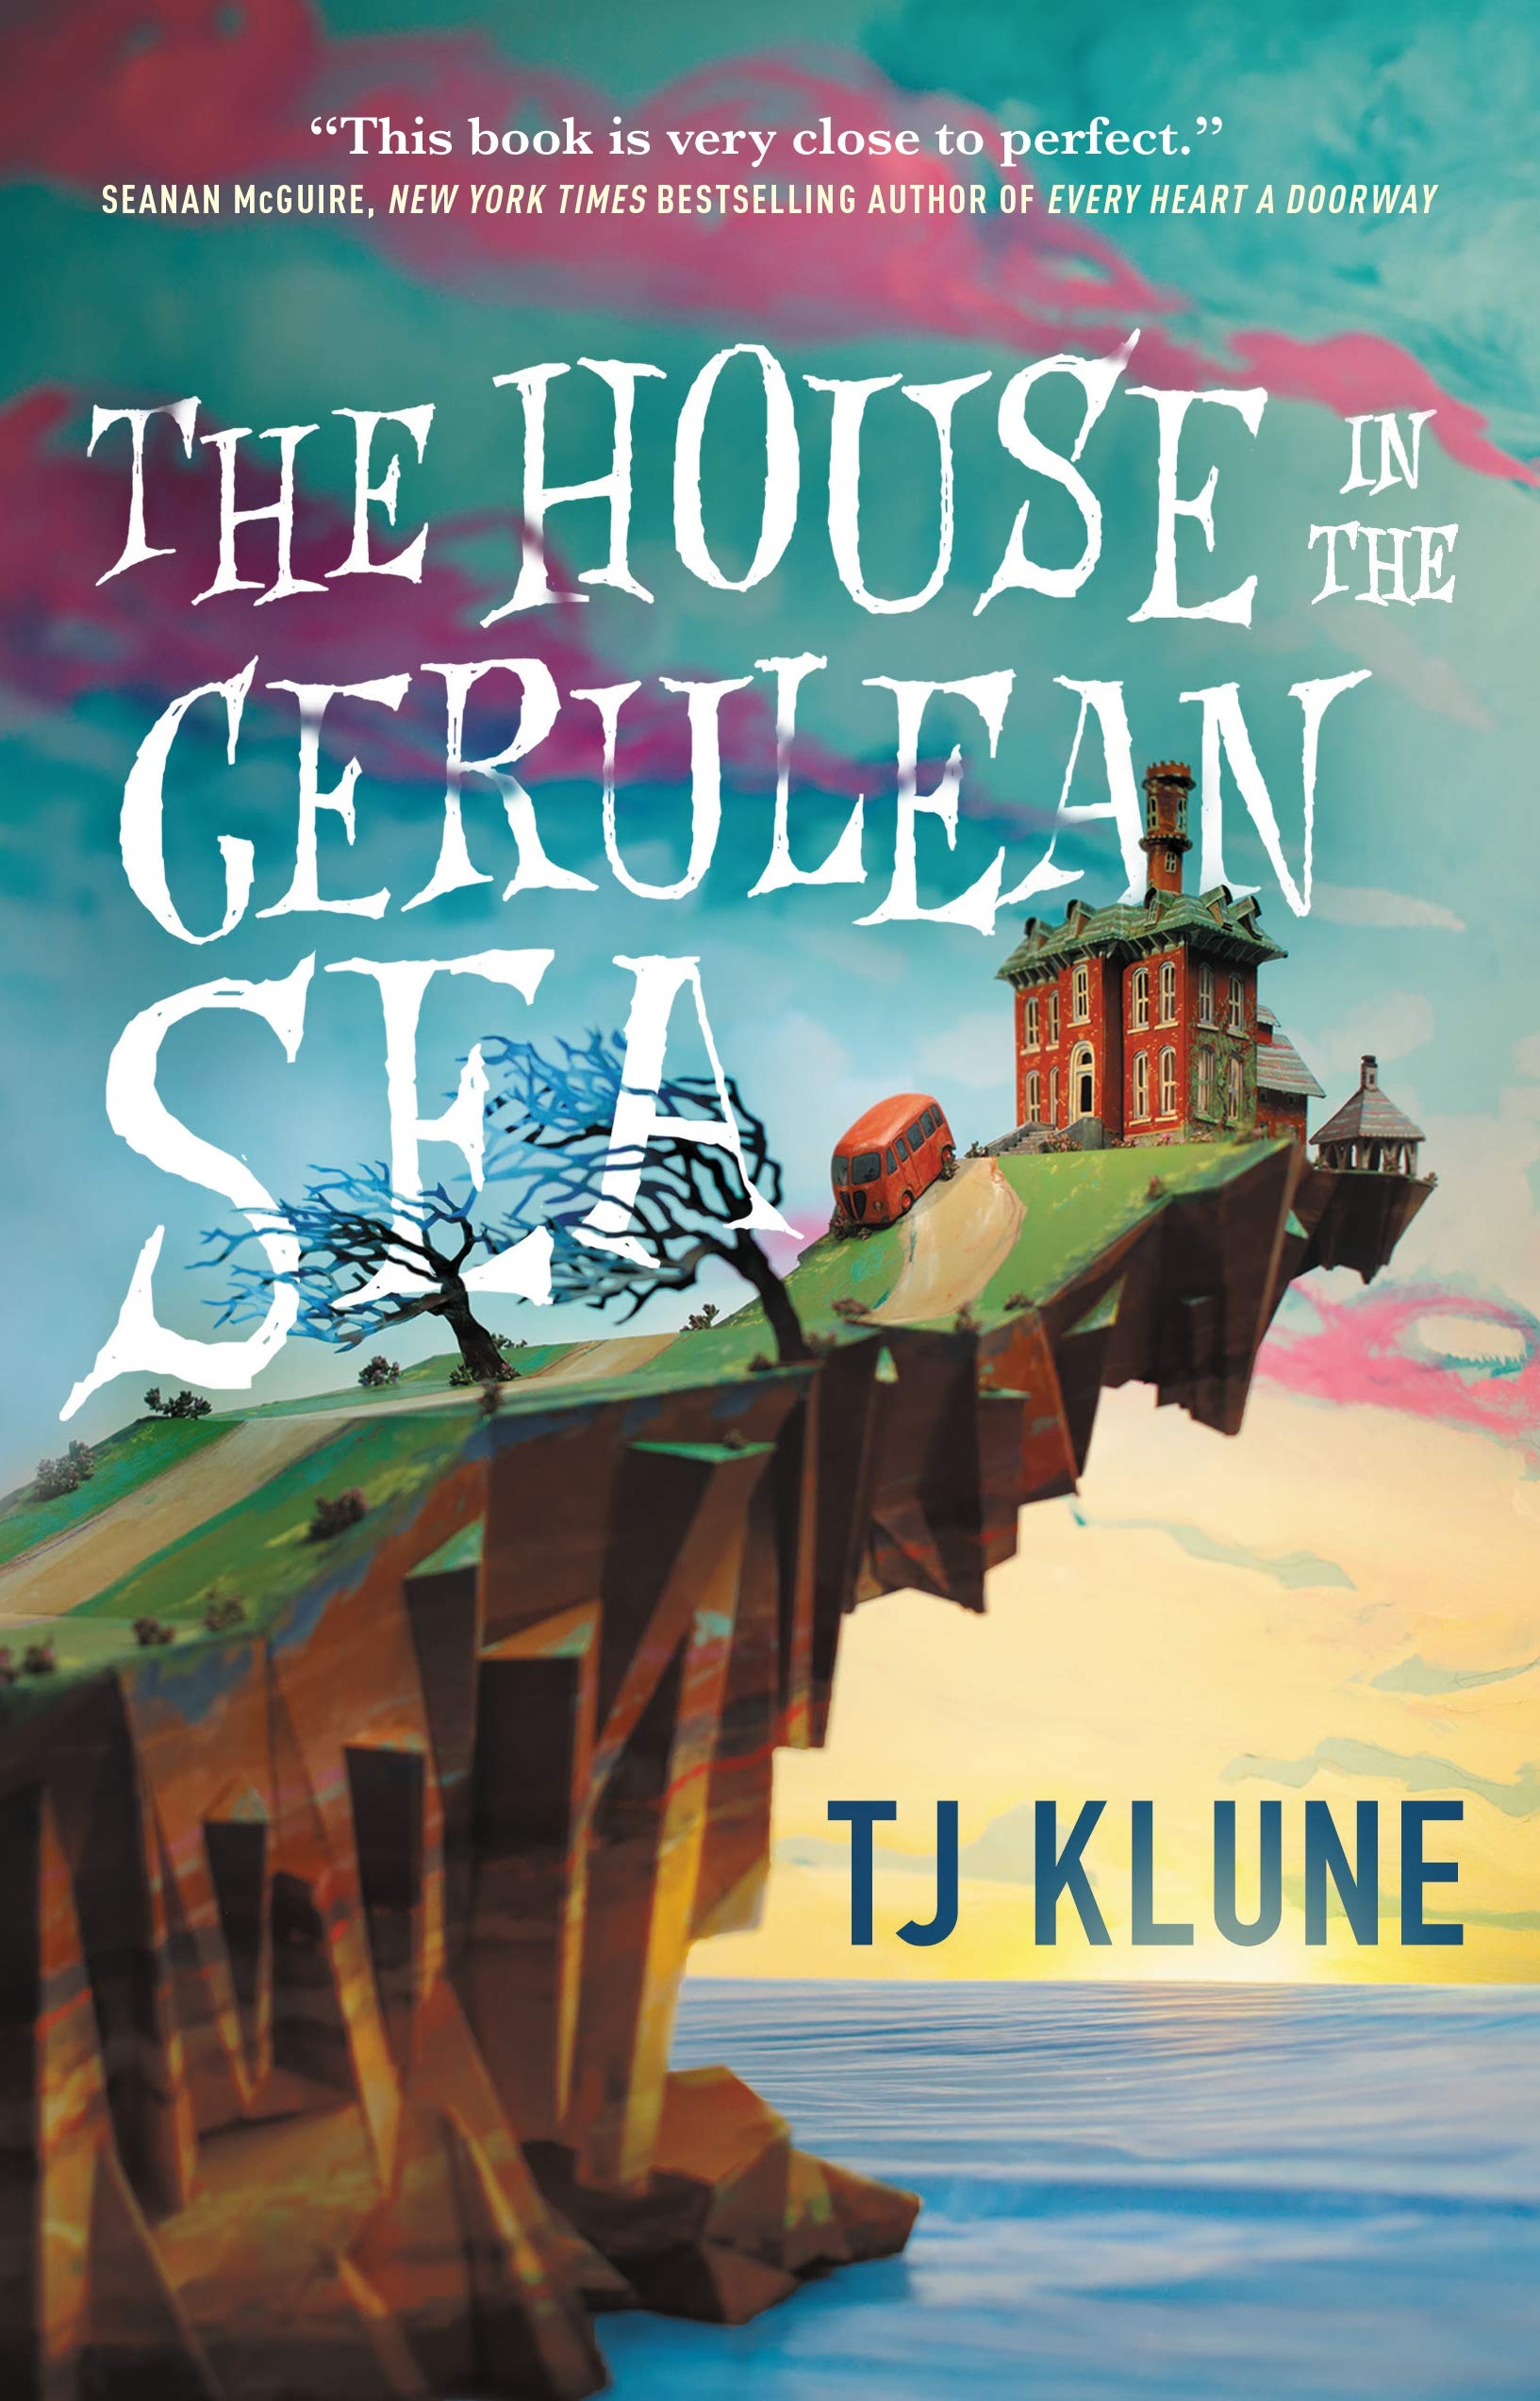 See The House in the Cerulean Sea in Library Catalog